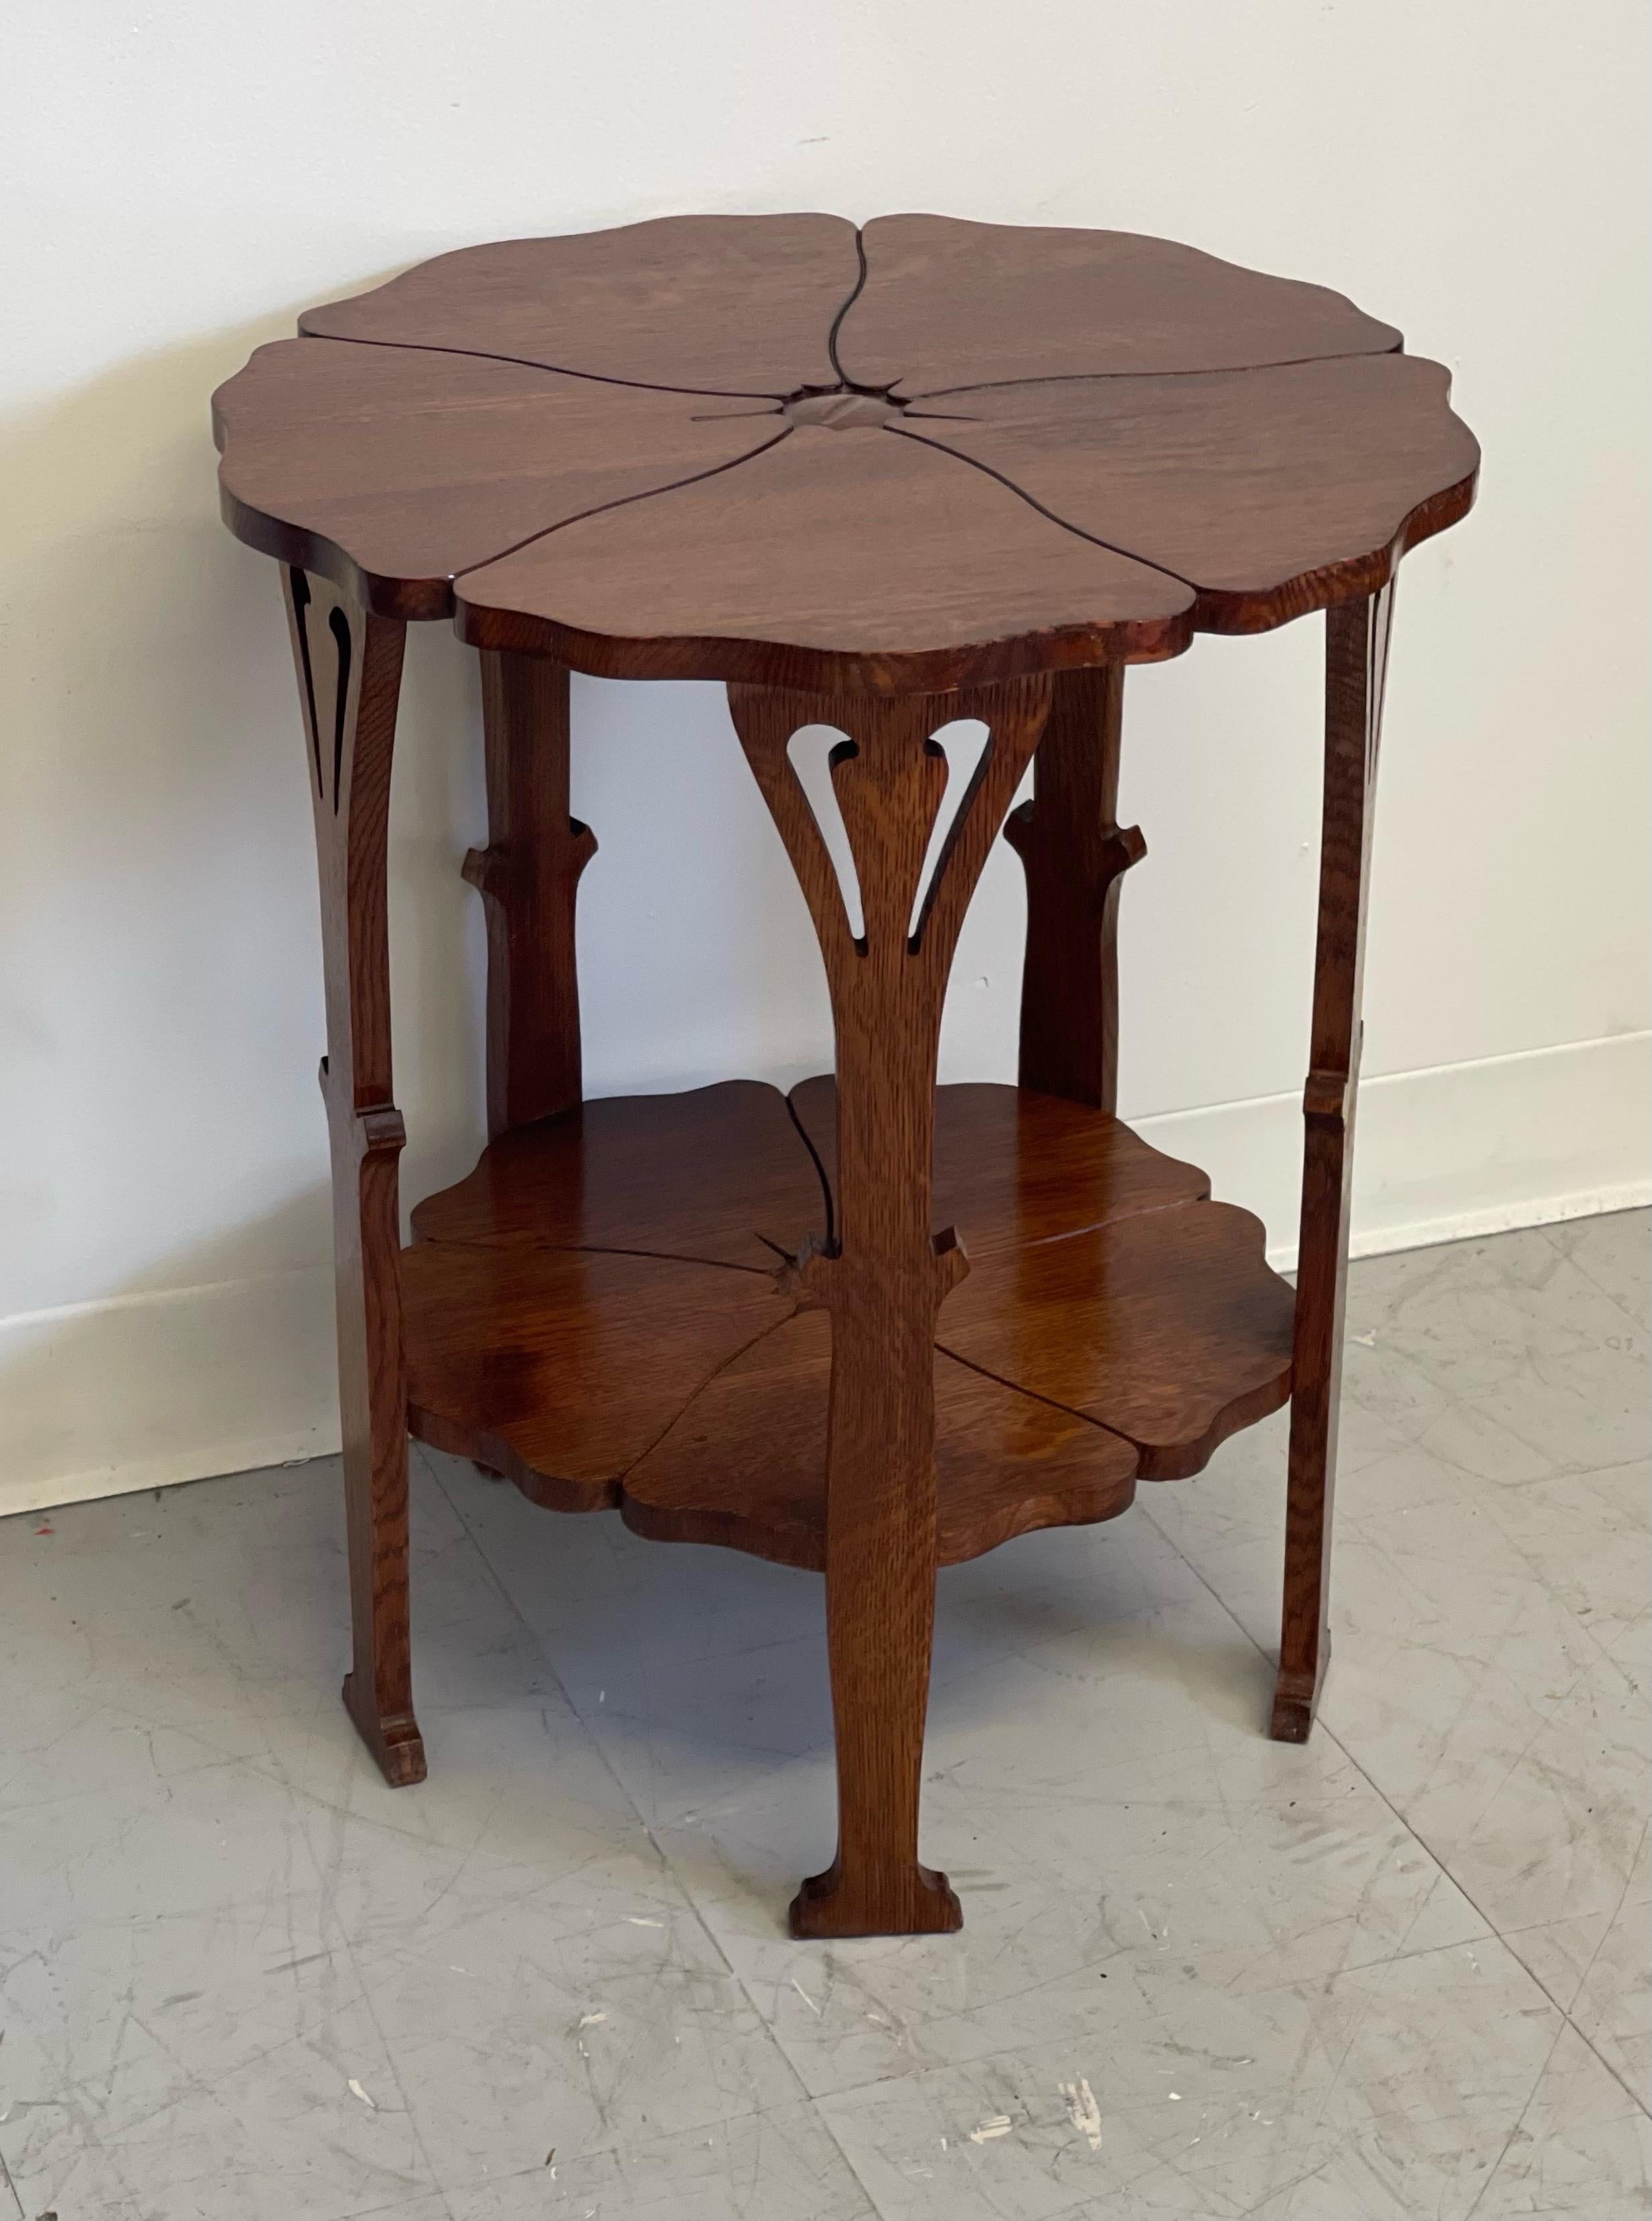 19th Century Delicately Designed Antique Gustave Stickily Poppy Table With Floral Motif For Sale